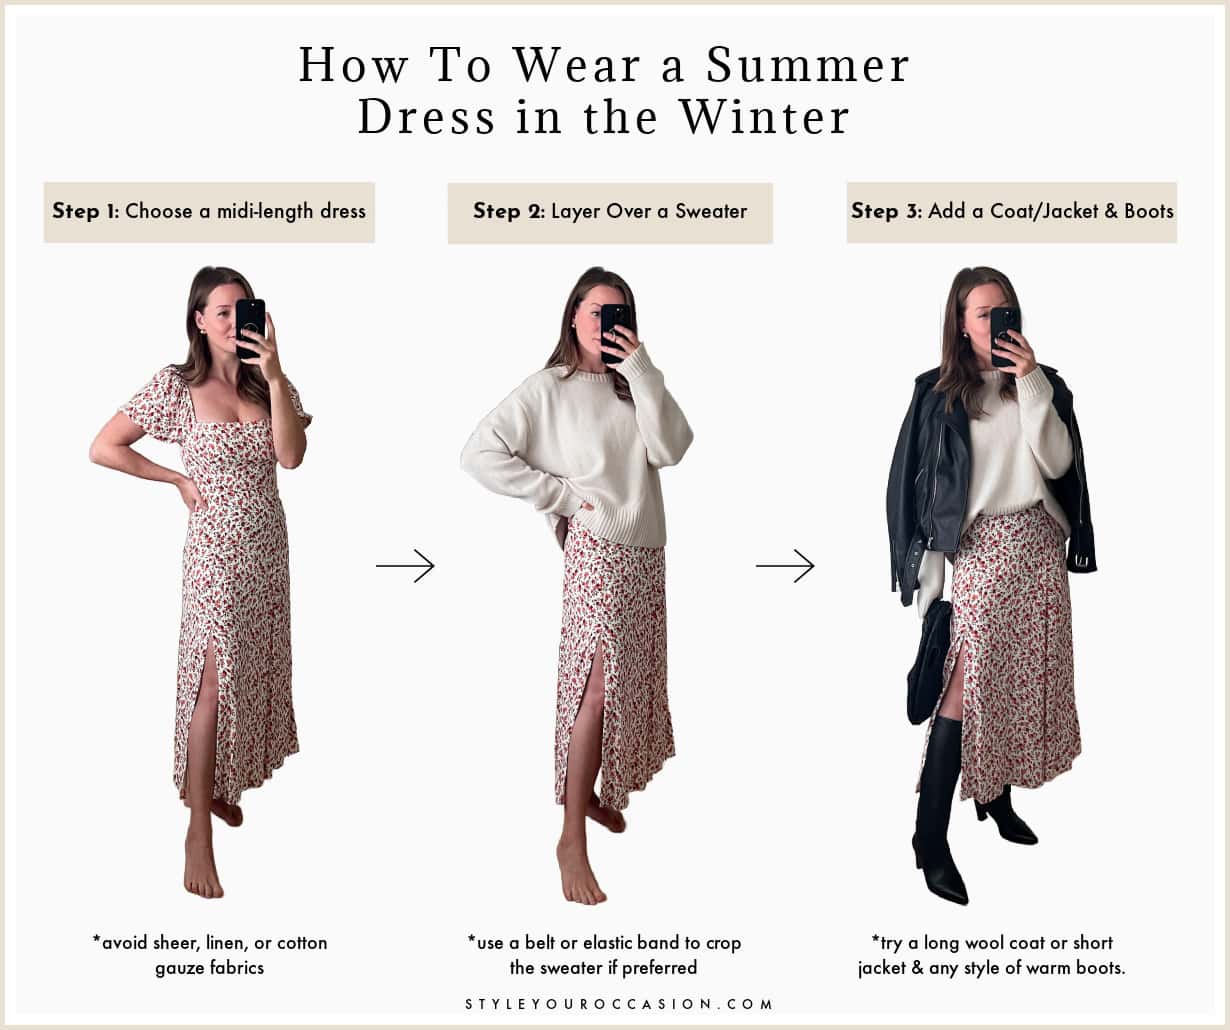 Graphic showing how to wear a summer dress in the winter.